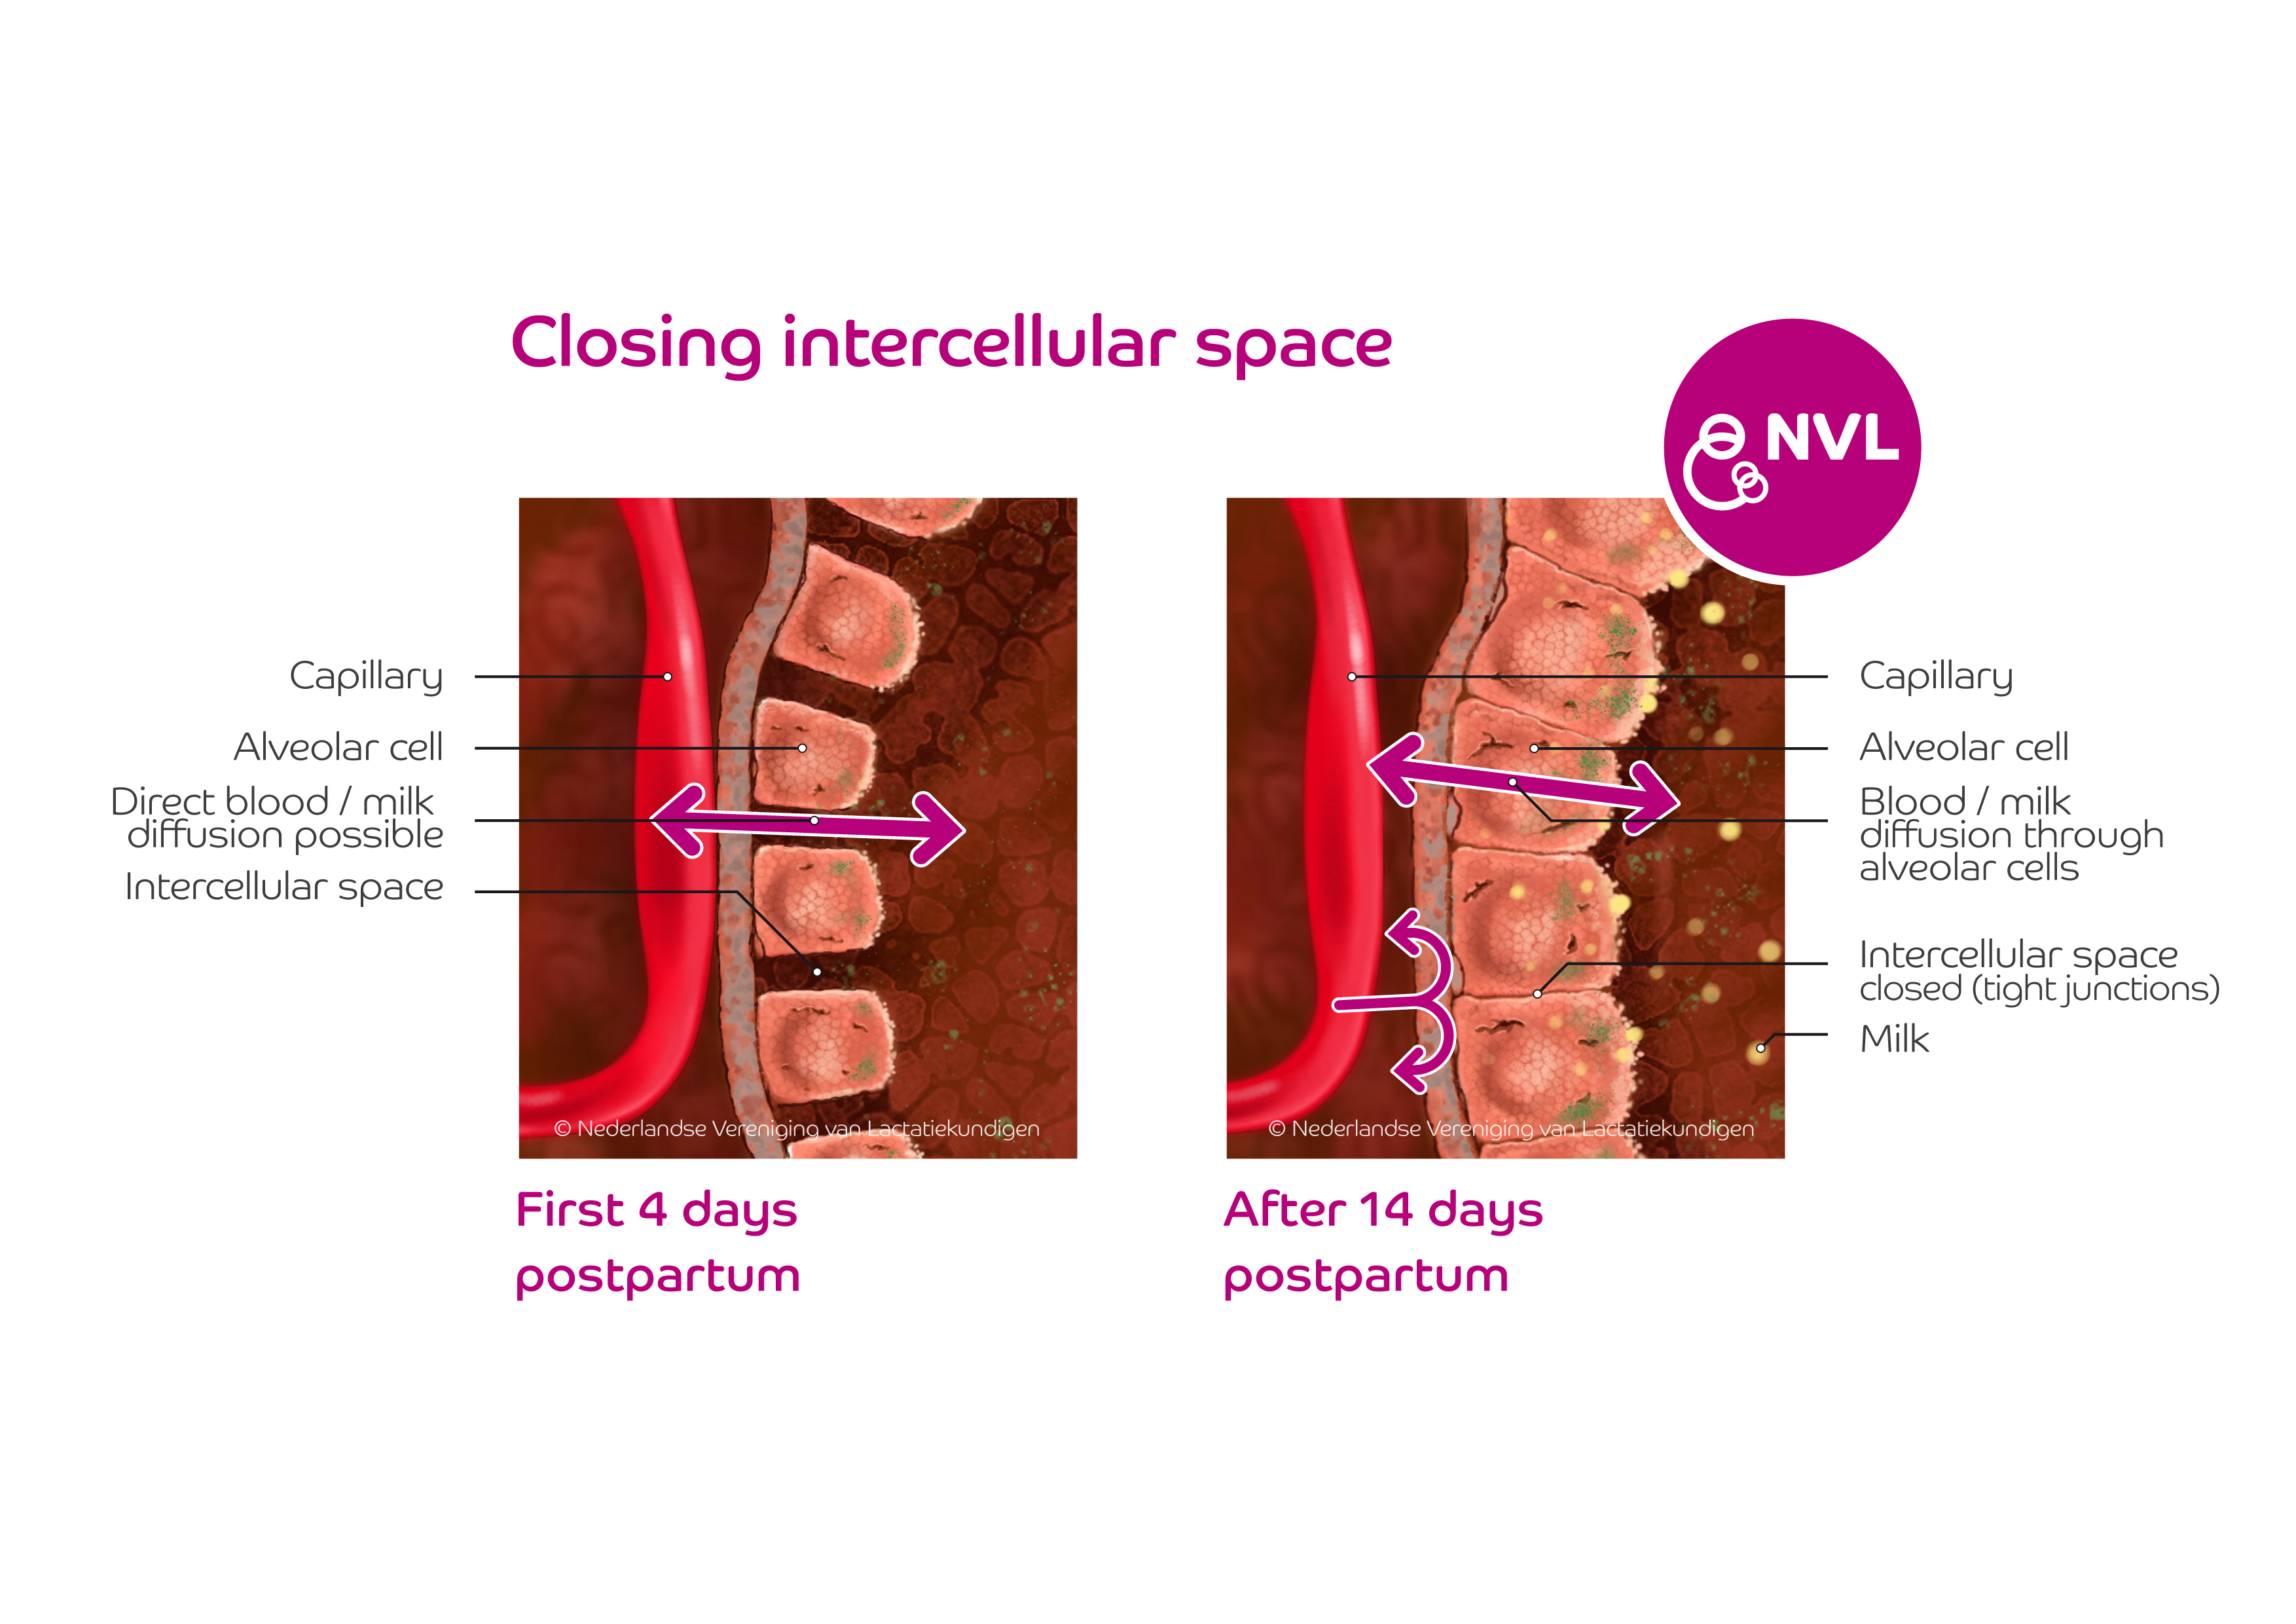 Closing intercellulair space breasttissue | NVL